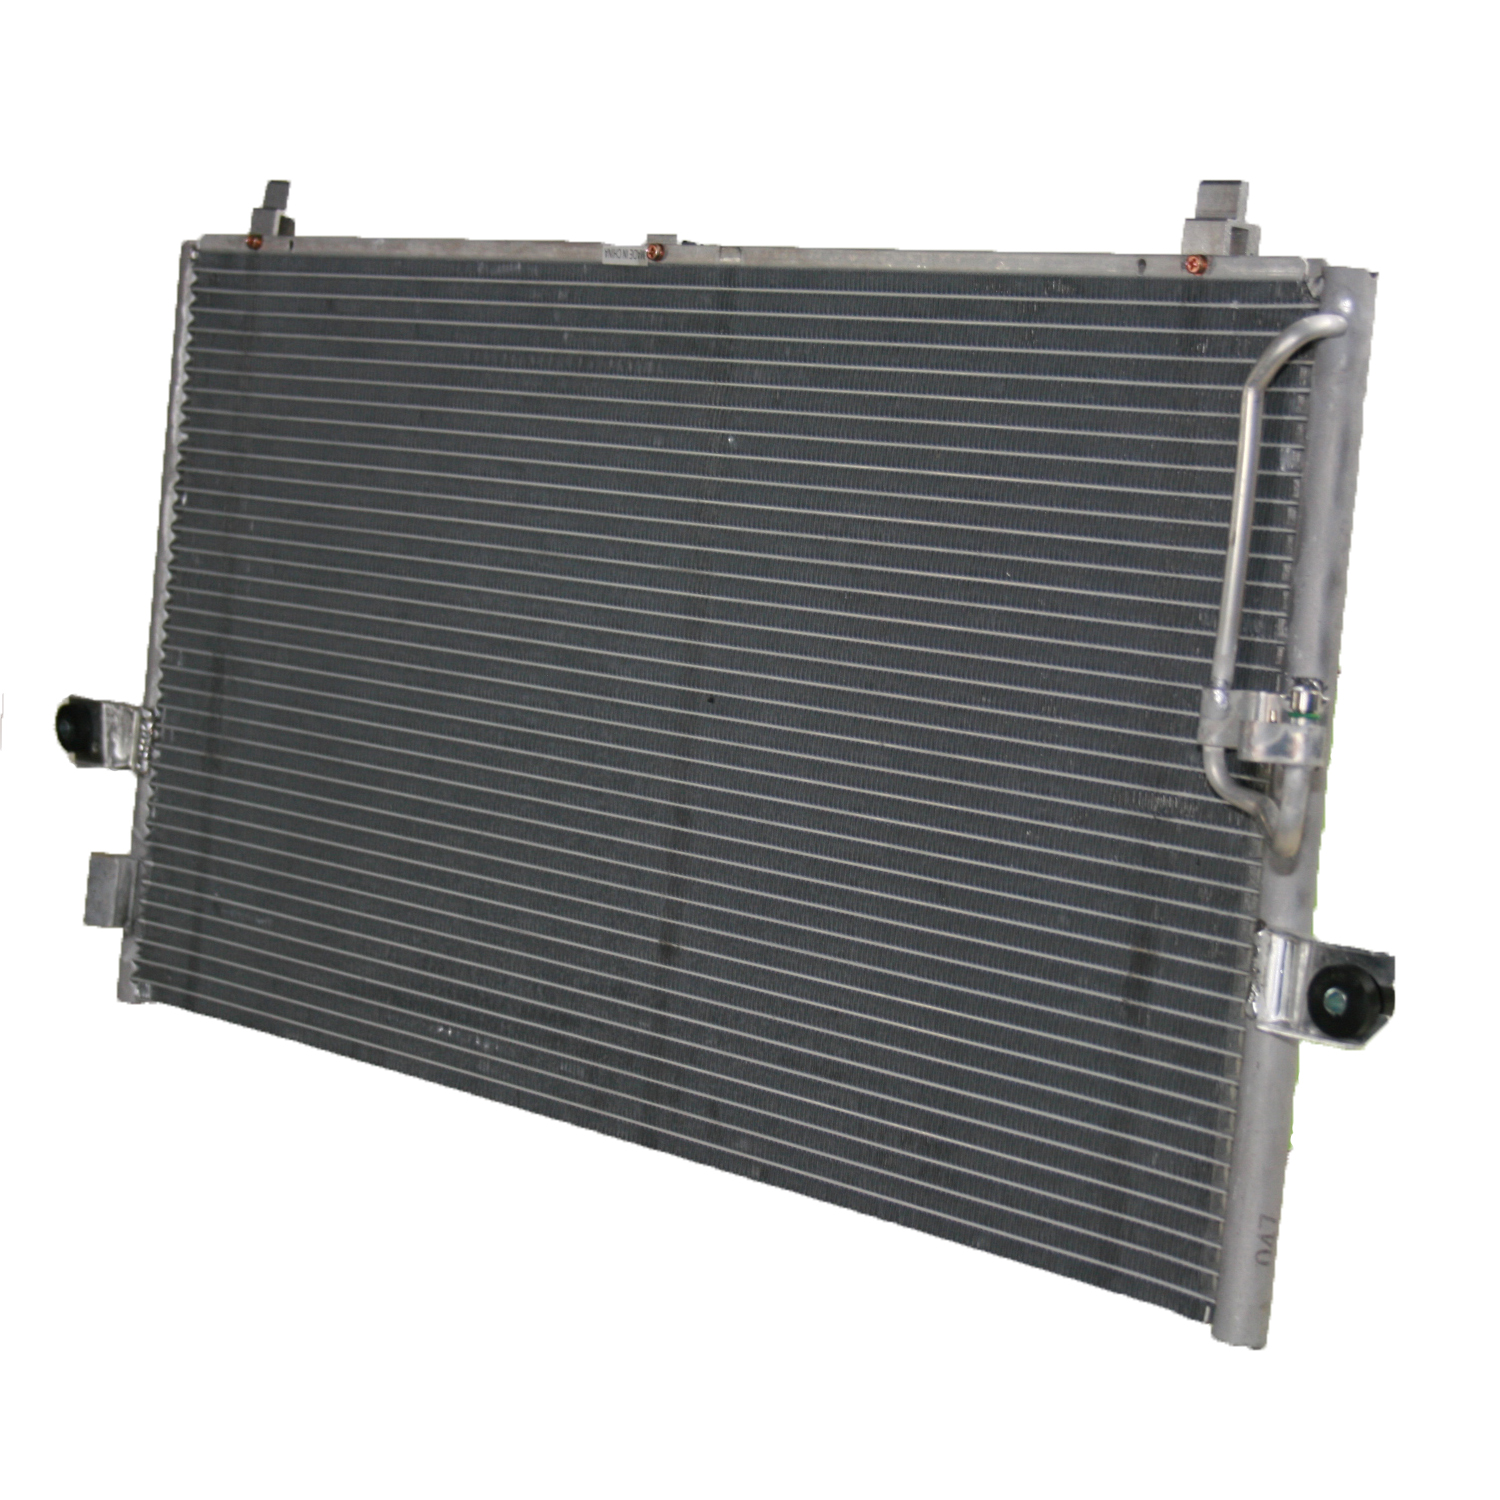 TCW Condenser 44-3036 New Product Image field_60b6a13a6e67c